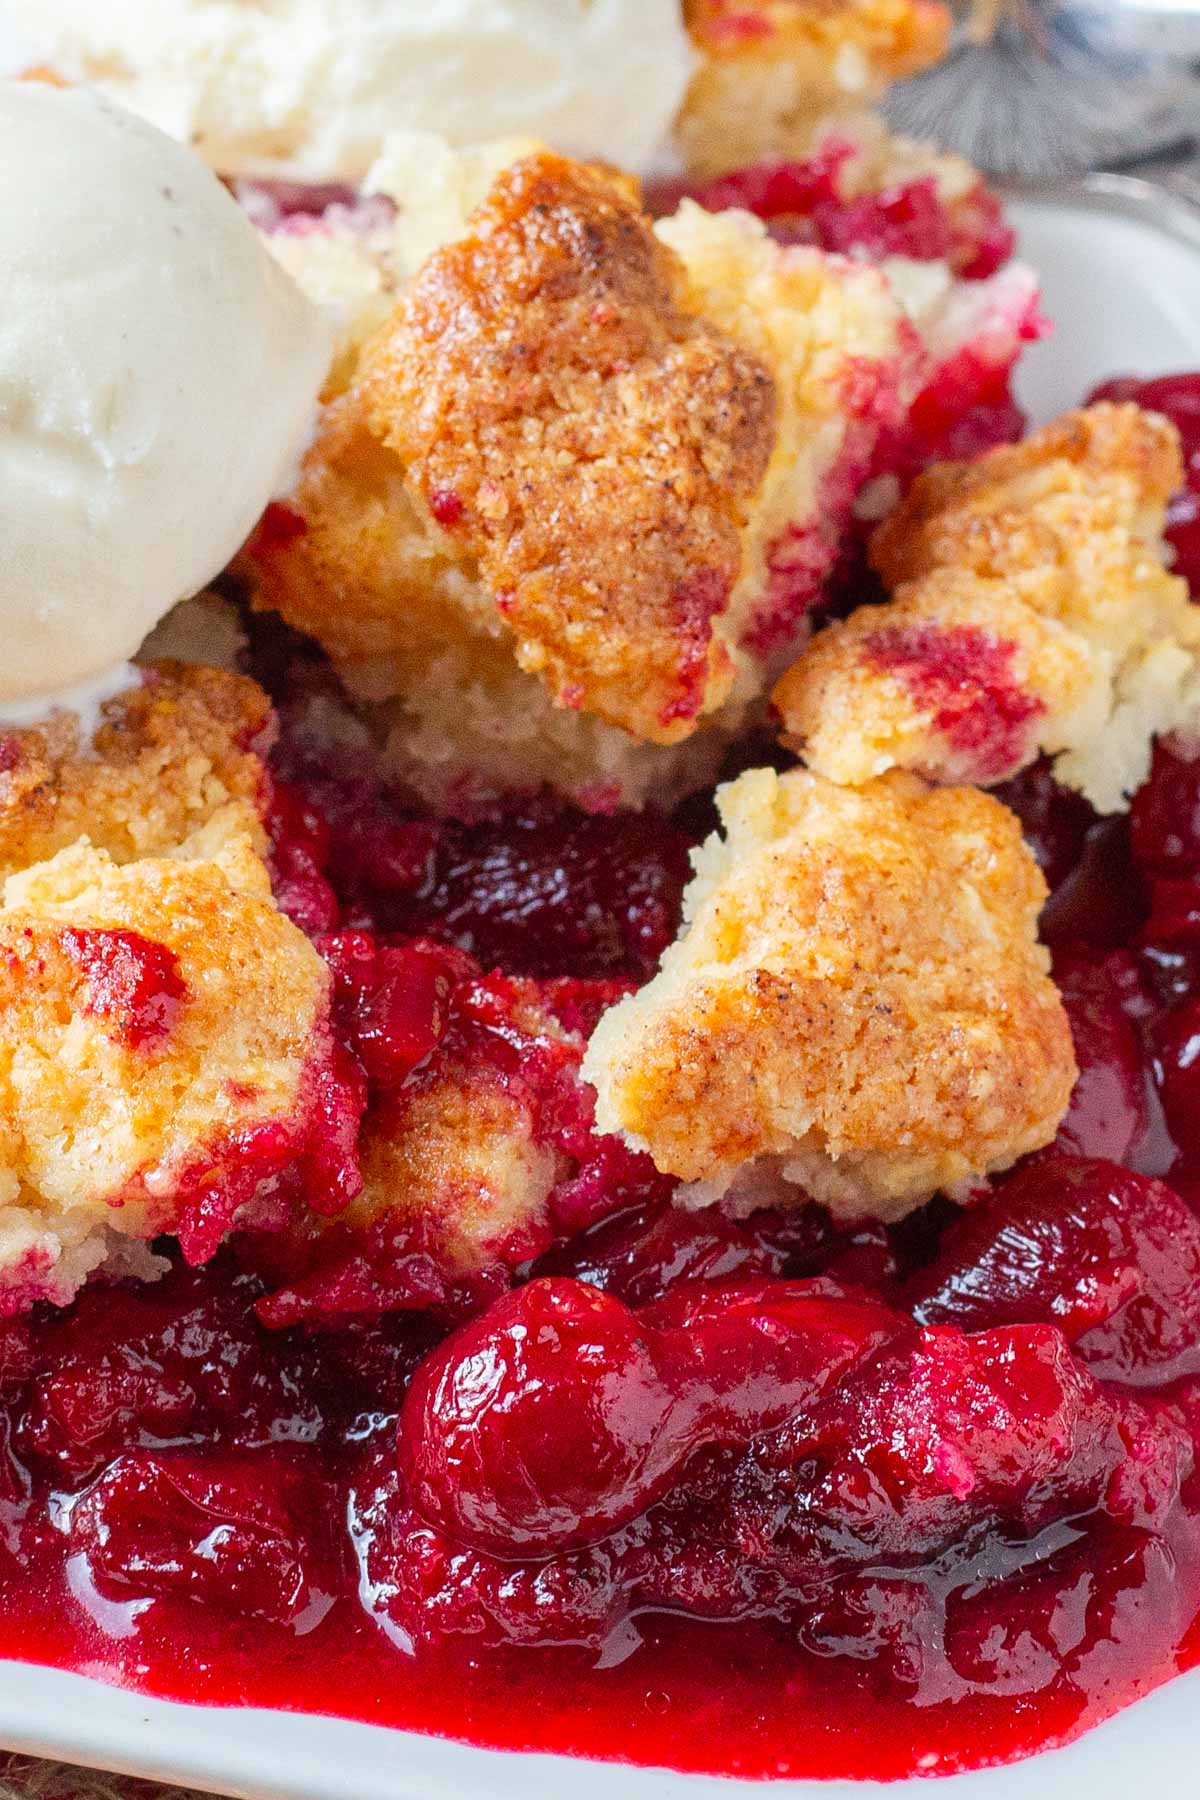 Sour cherry filling topped with golden biscuit crust and a scoop of ice cream.